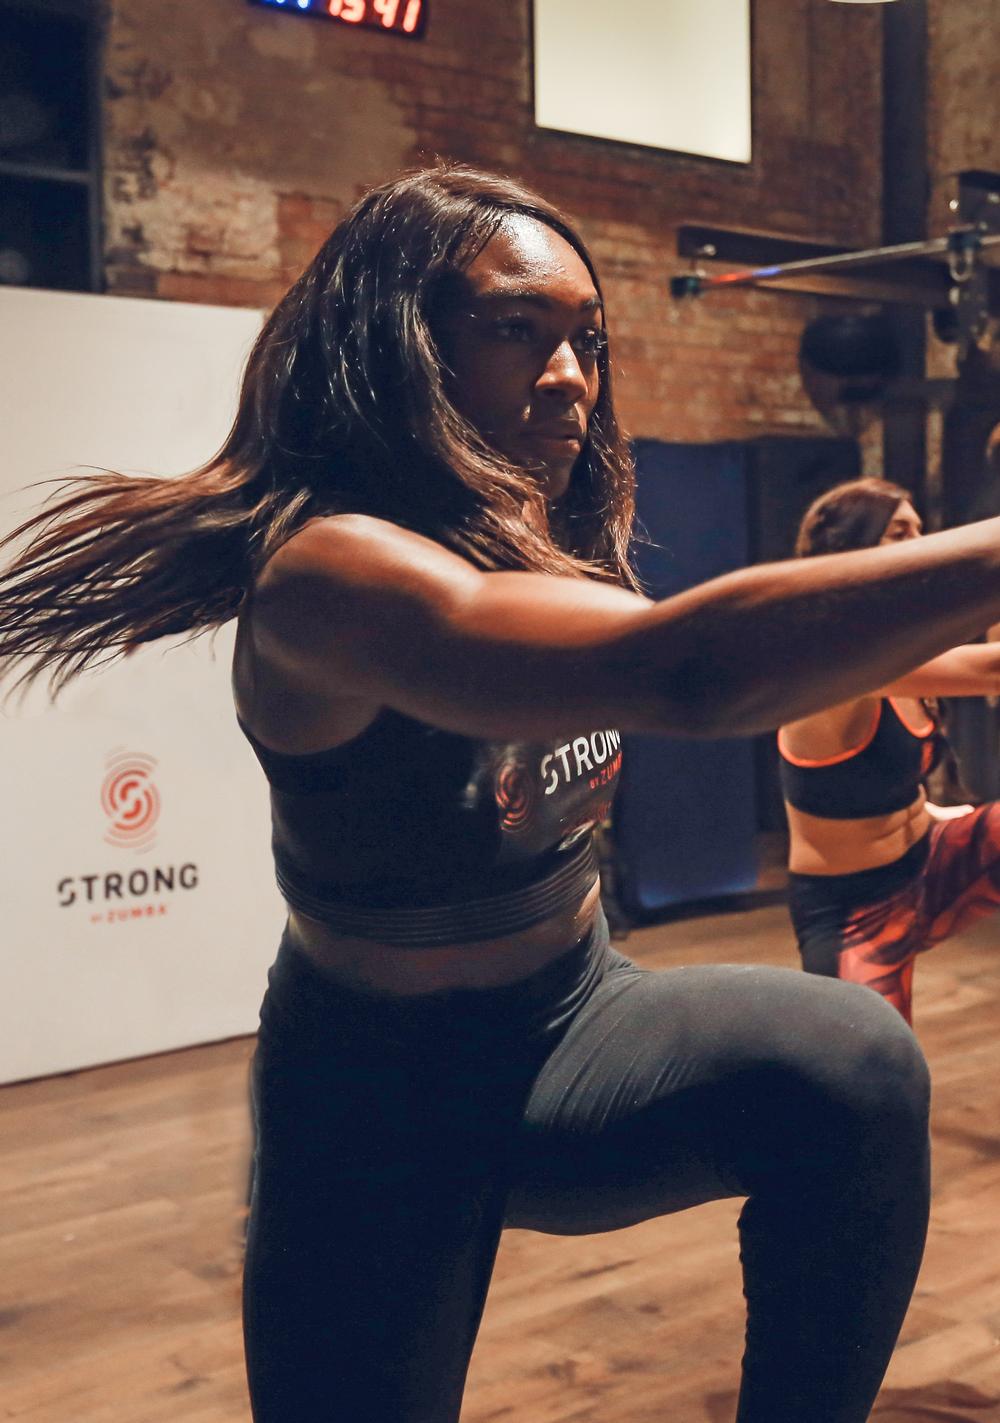 The athlete is the new UK ambassador for Zumba’s new HIIT-style class